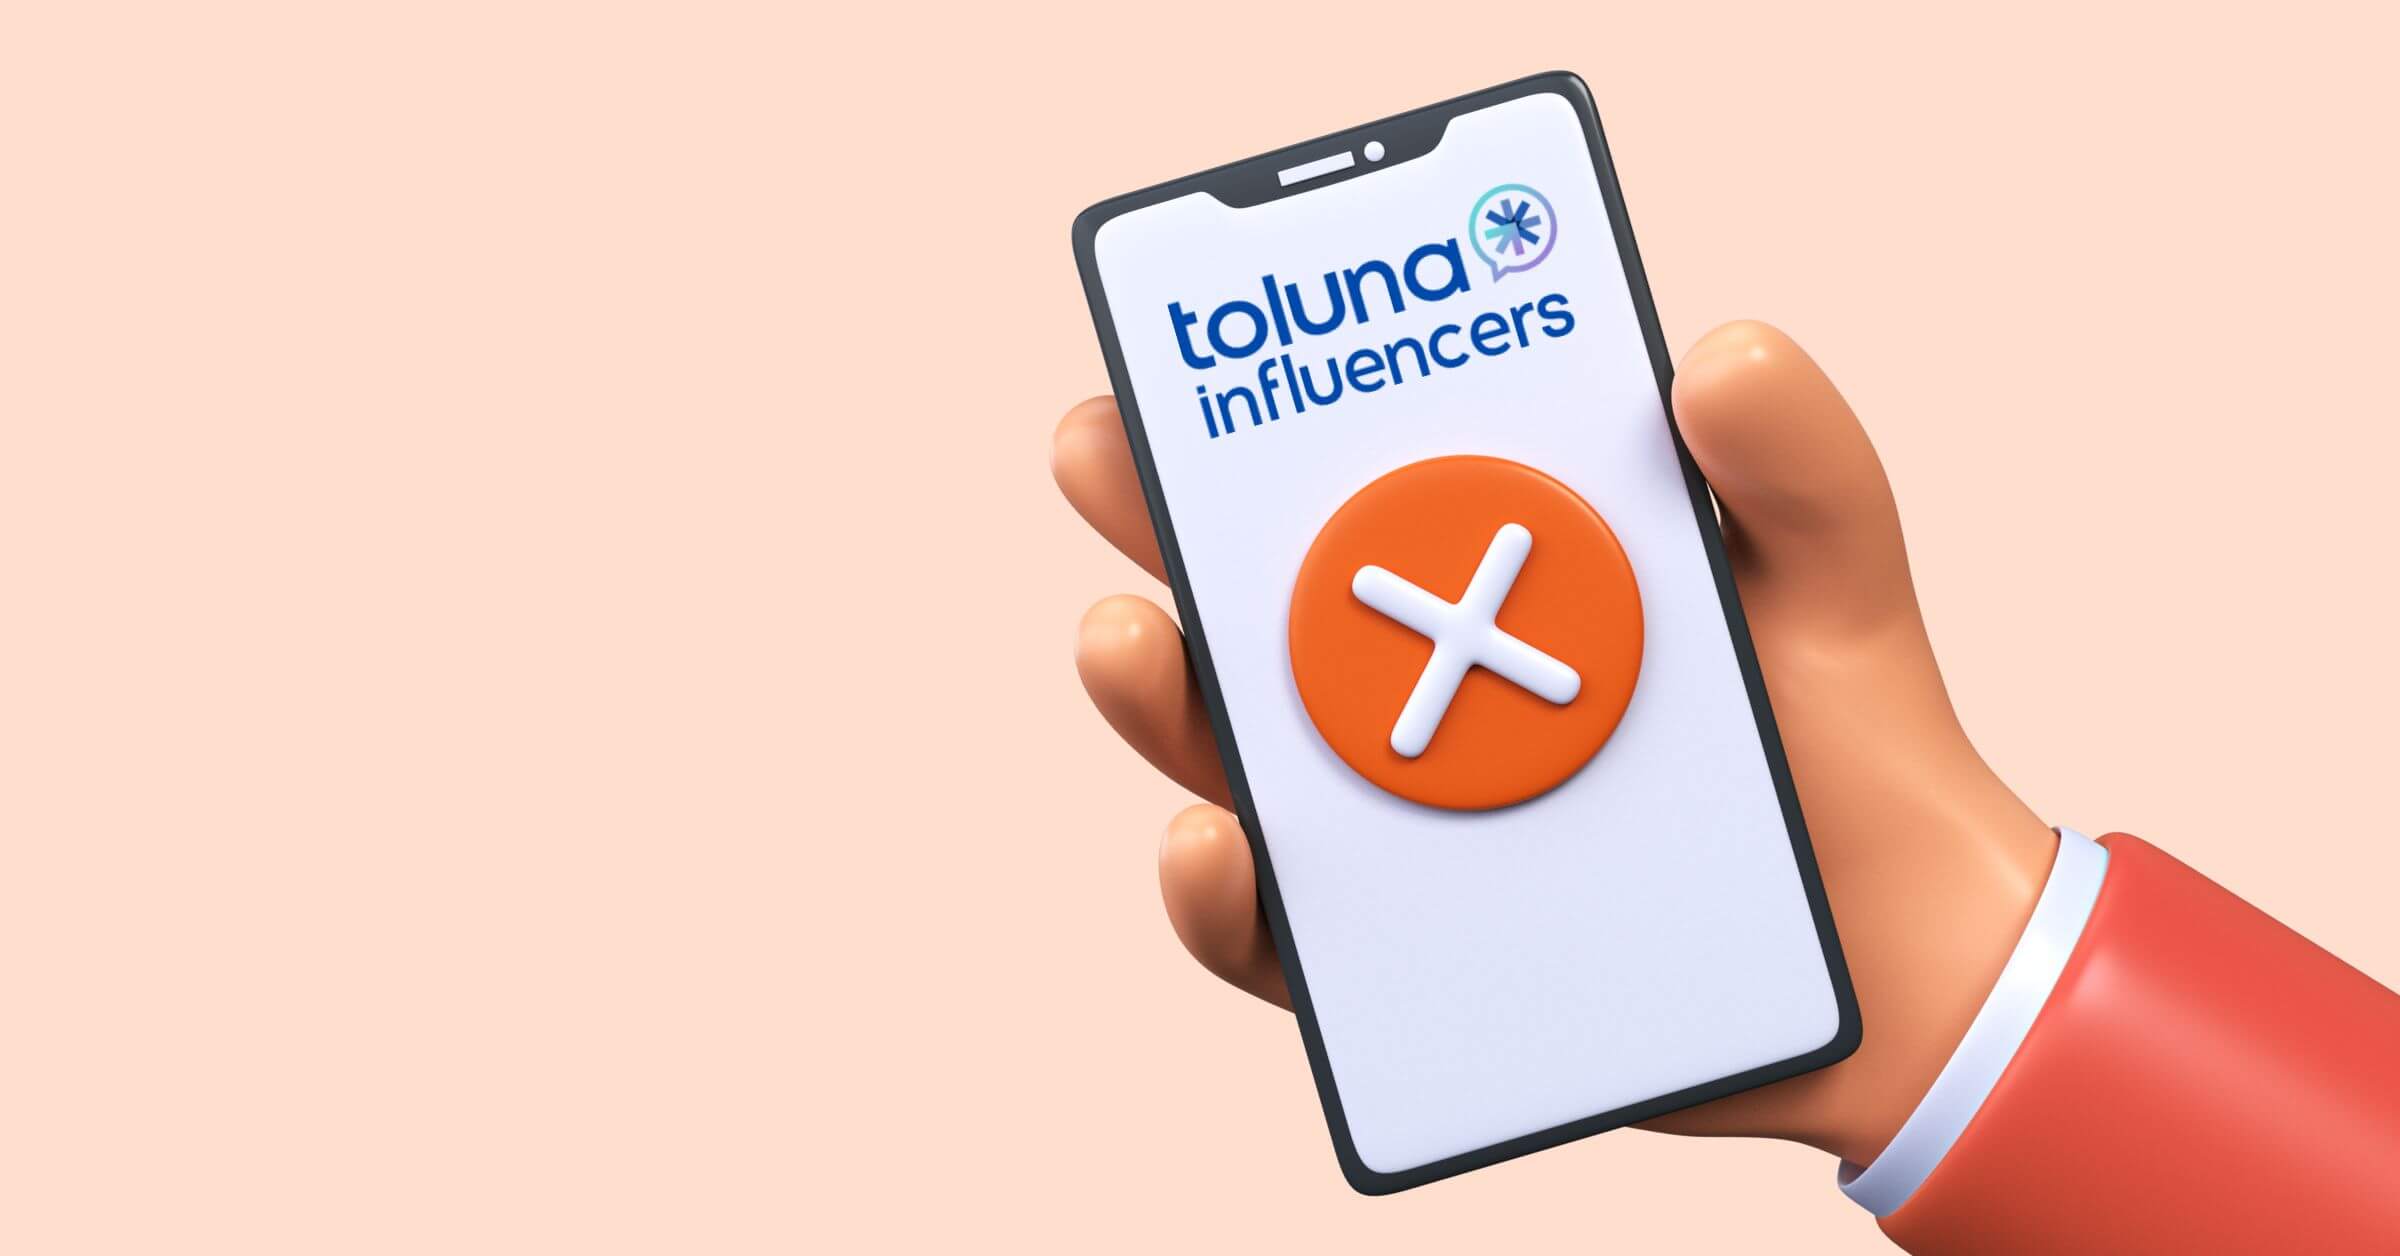 Toluna Review: Is It Safe or a Scam? - Monetha